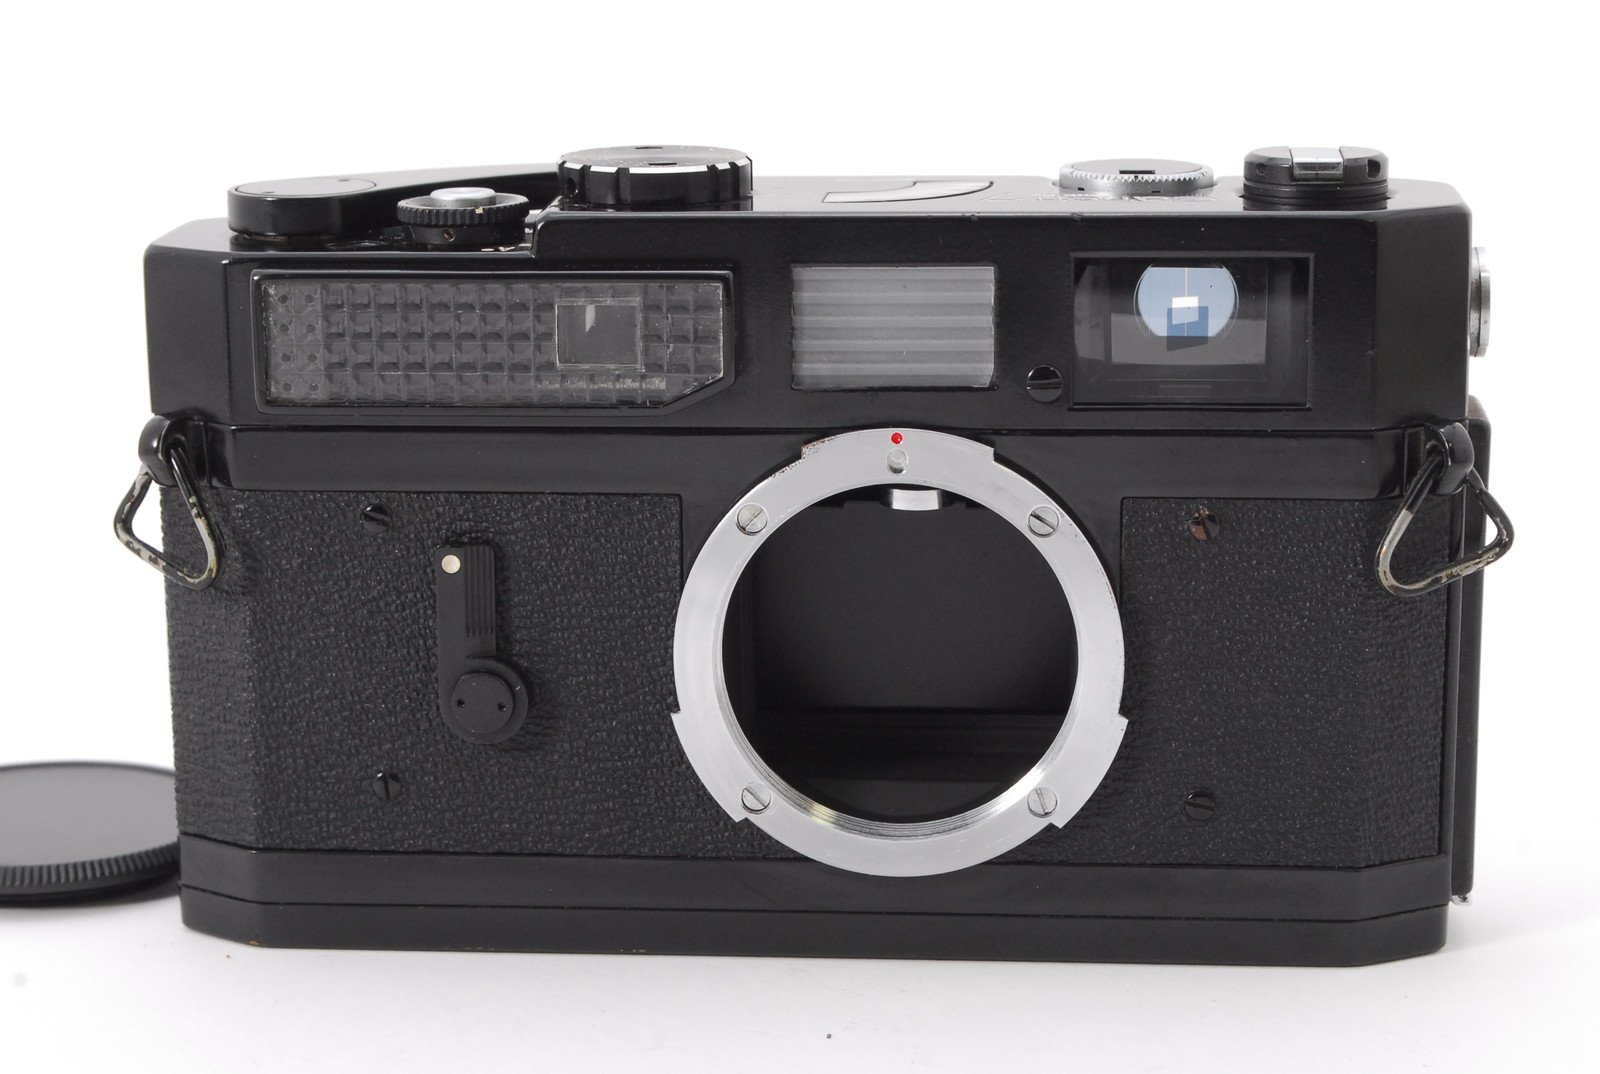 This Rare Black Paint Canon 7 Was a Leica M3 Competitor